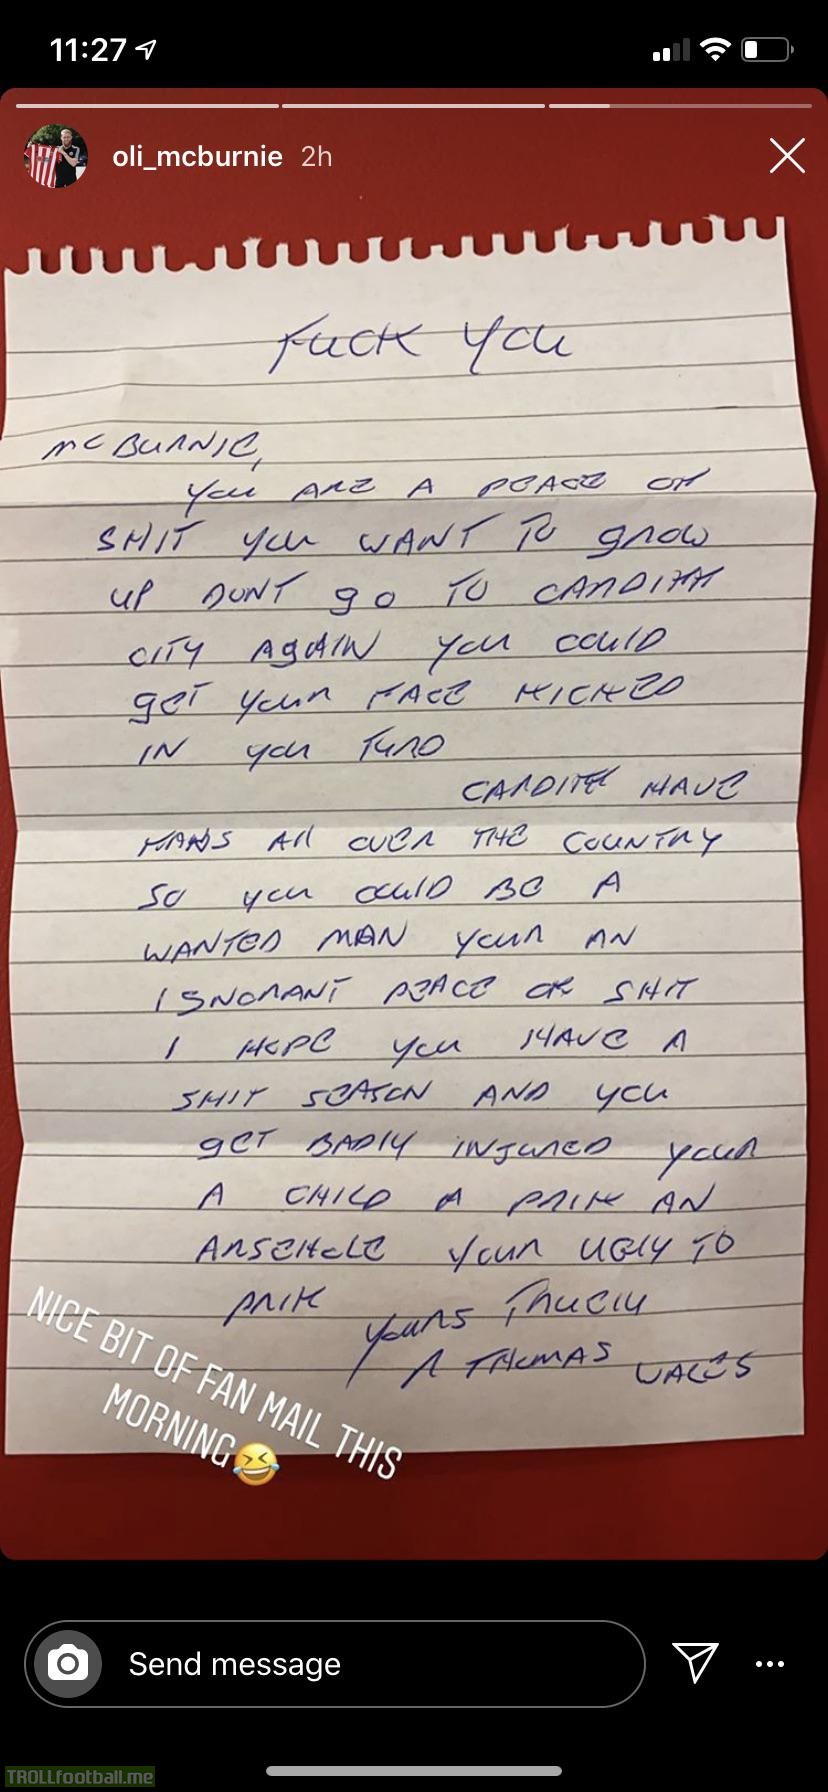 Sheffield United’s Oli McBurnie with an interesting piece of fan mail this morning